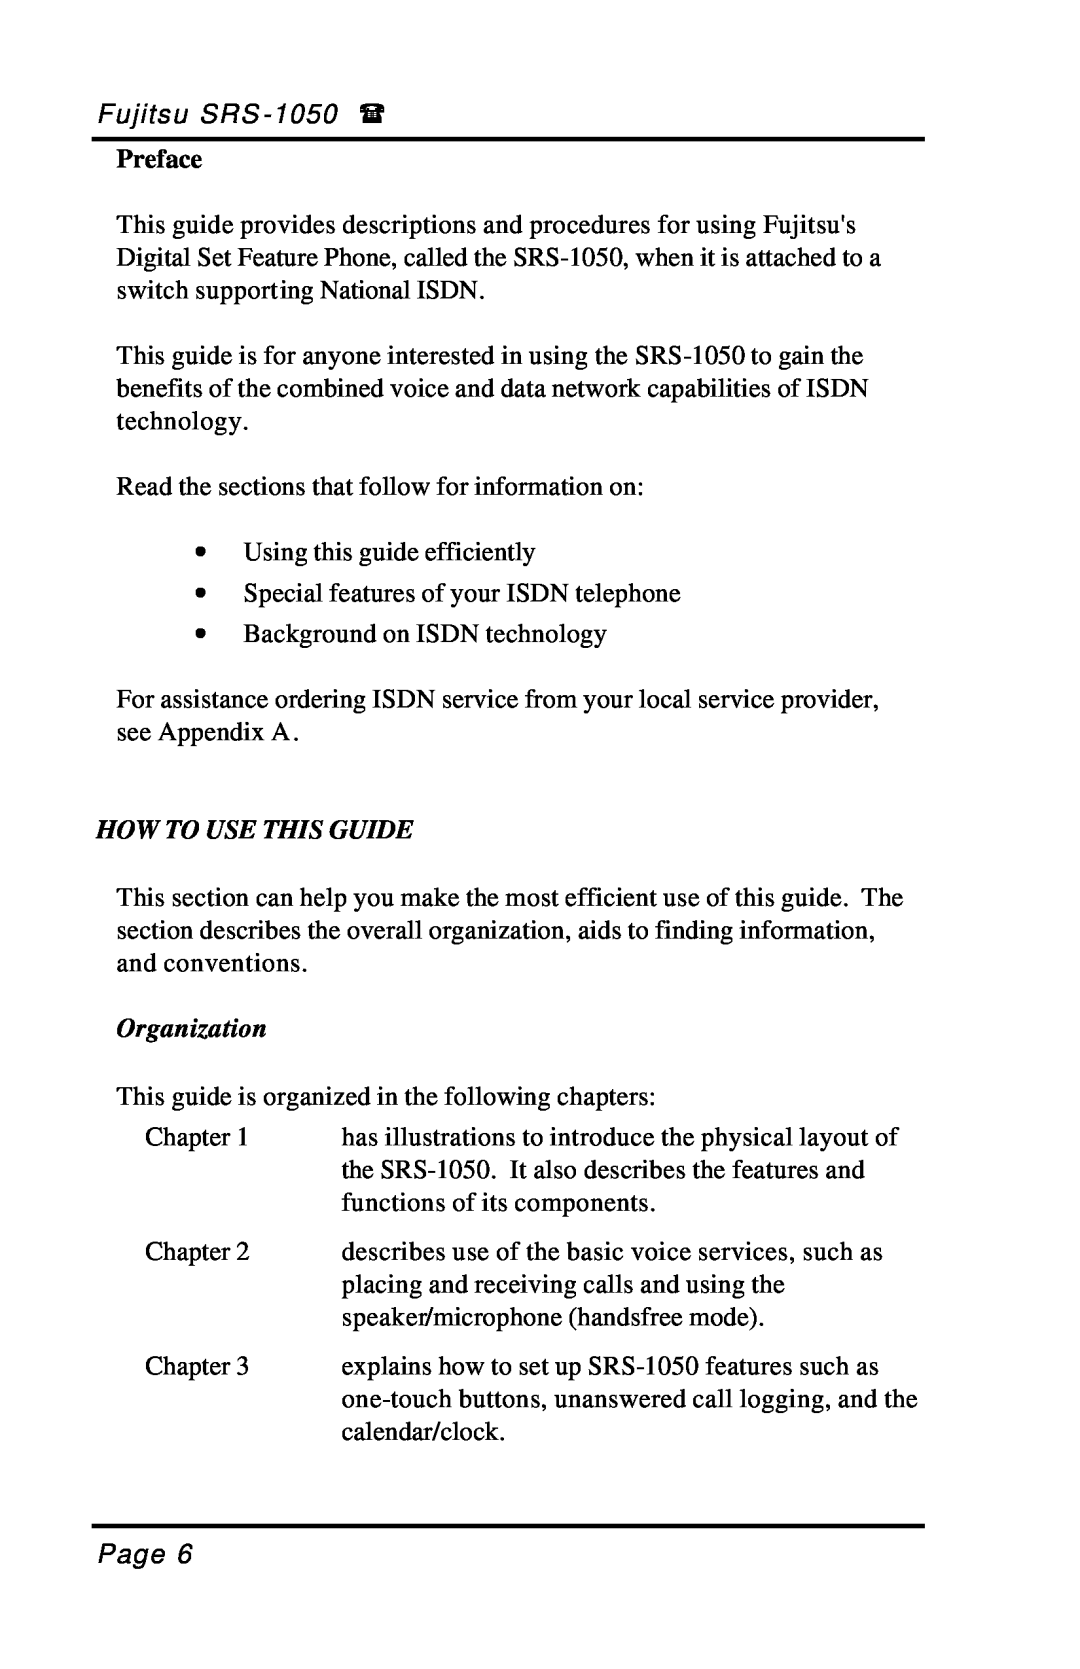 Fujitsu SRS-1050 manual How To Use This Guide, Organization, Preface 